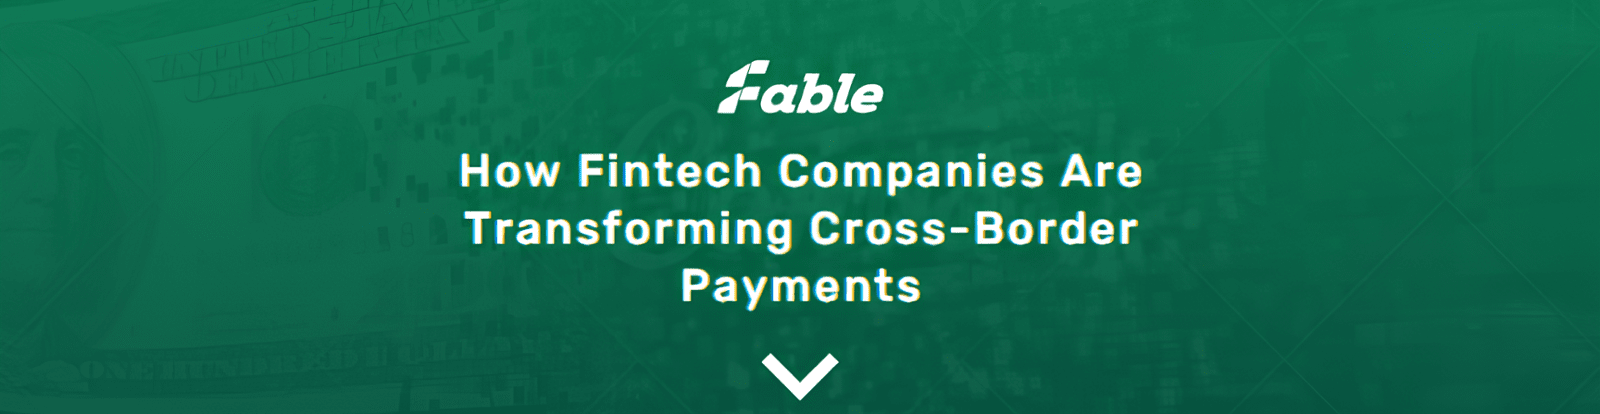 How Fintech Companies Are Transforming Cross-Border Payments